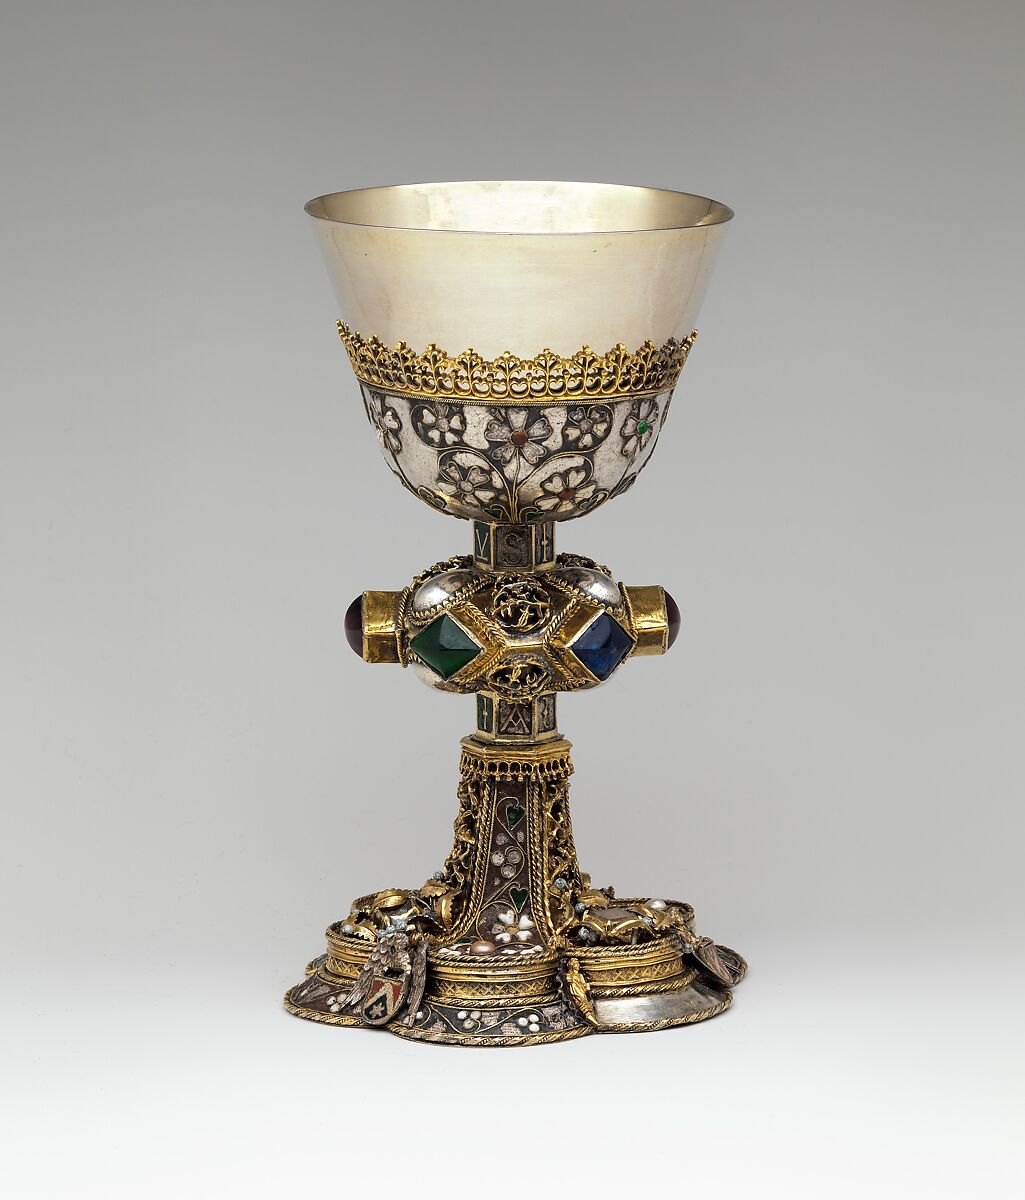 Chalice, Silver, partly gilded, glass, semiprecious stones(?), with filigree and other enameling, Central European 